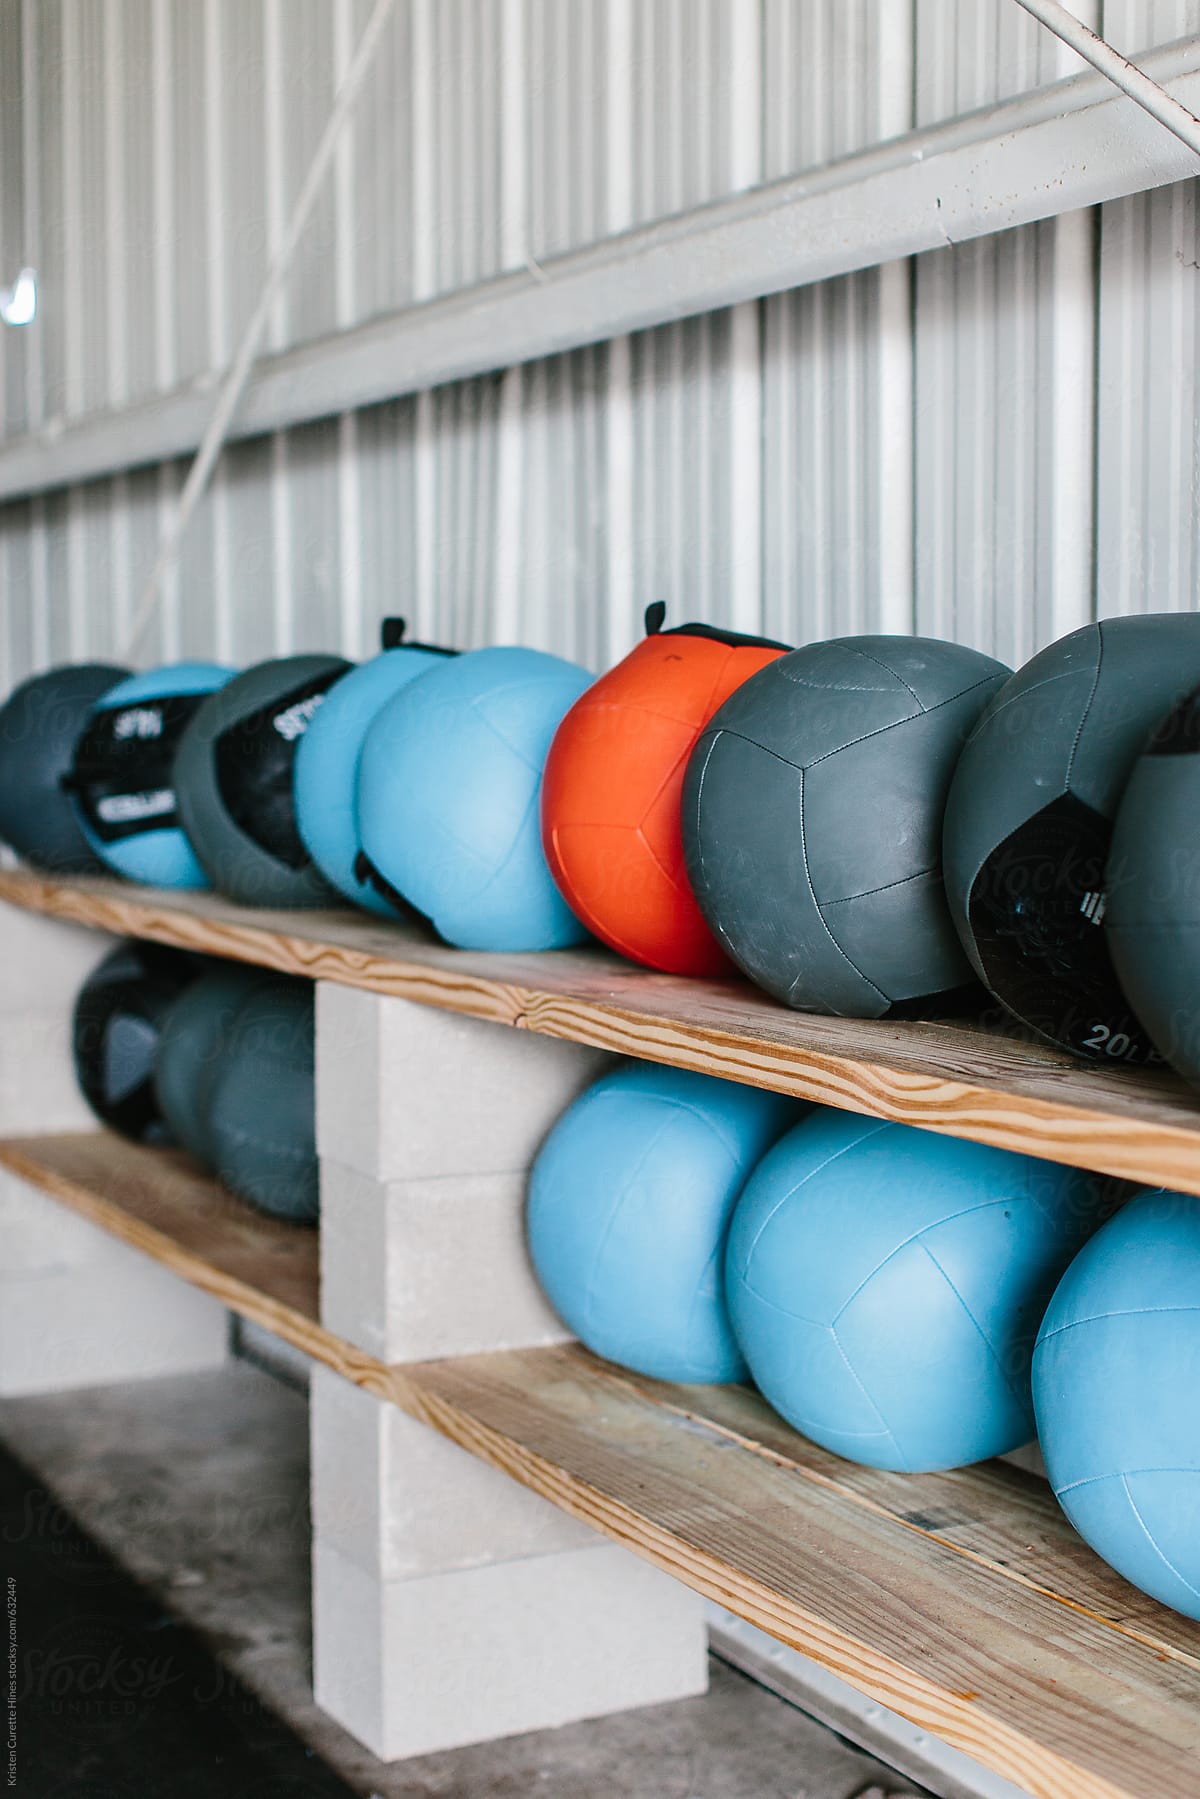 Heavy medicine balls lined up in an indoor gym